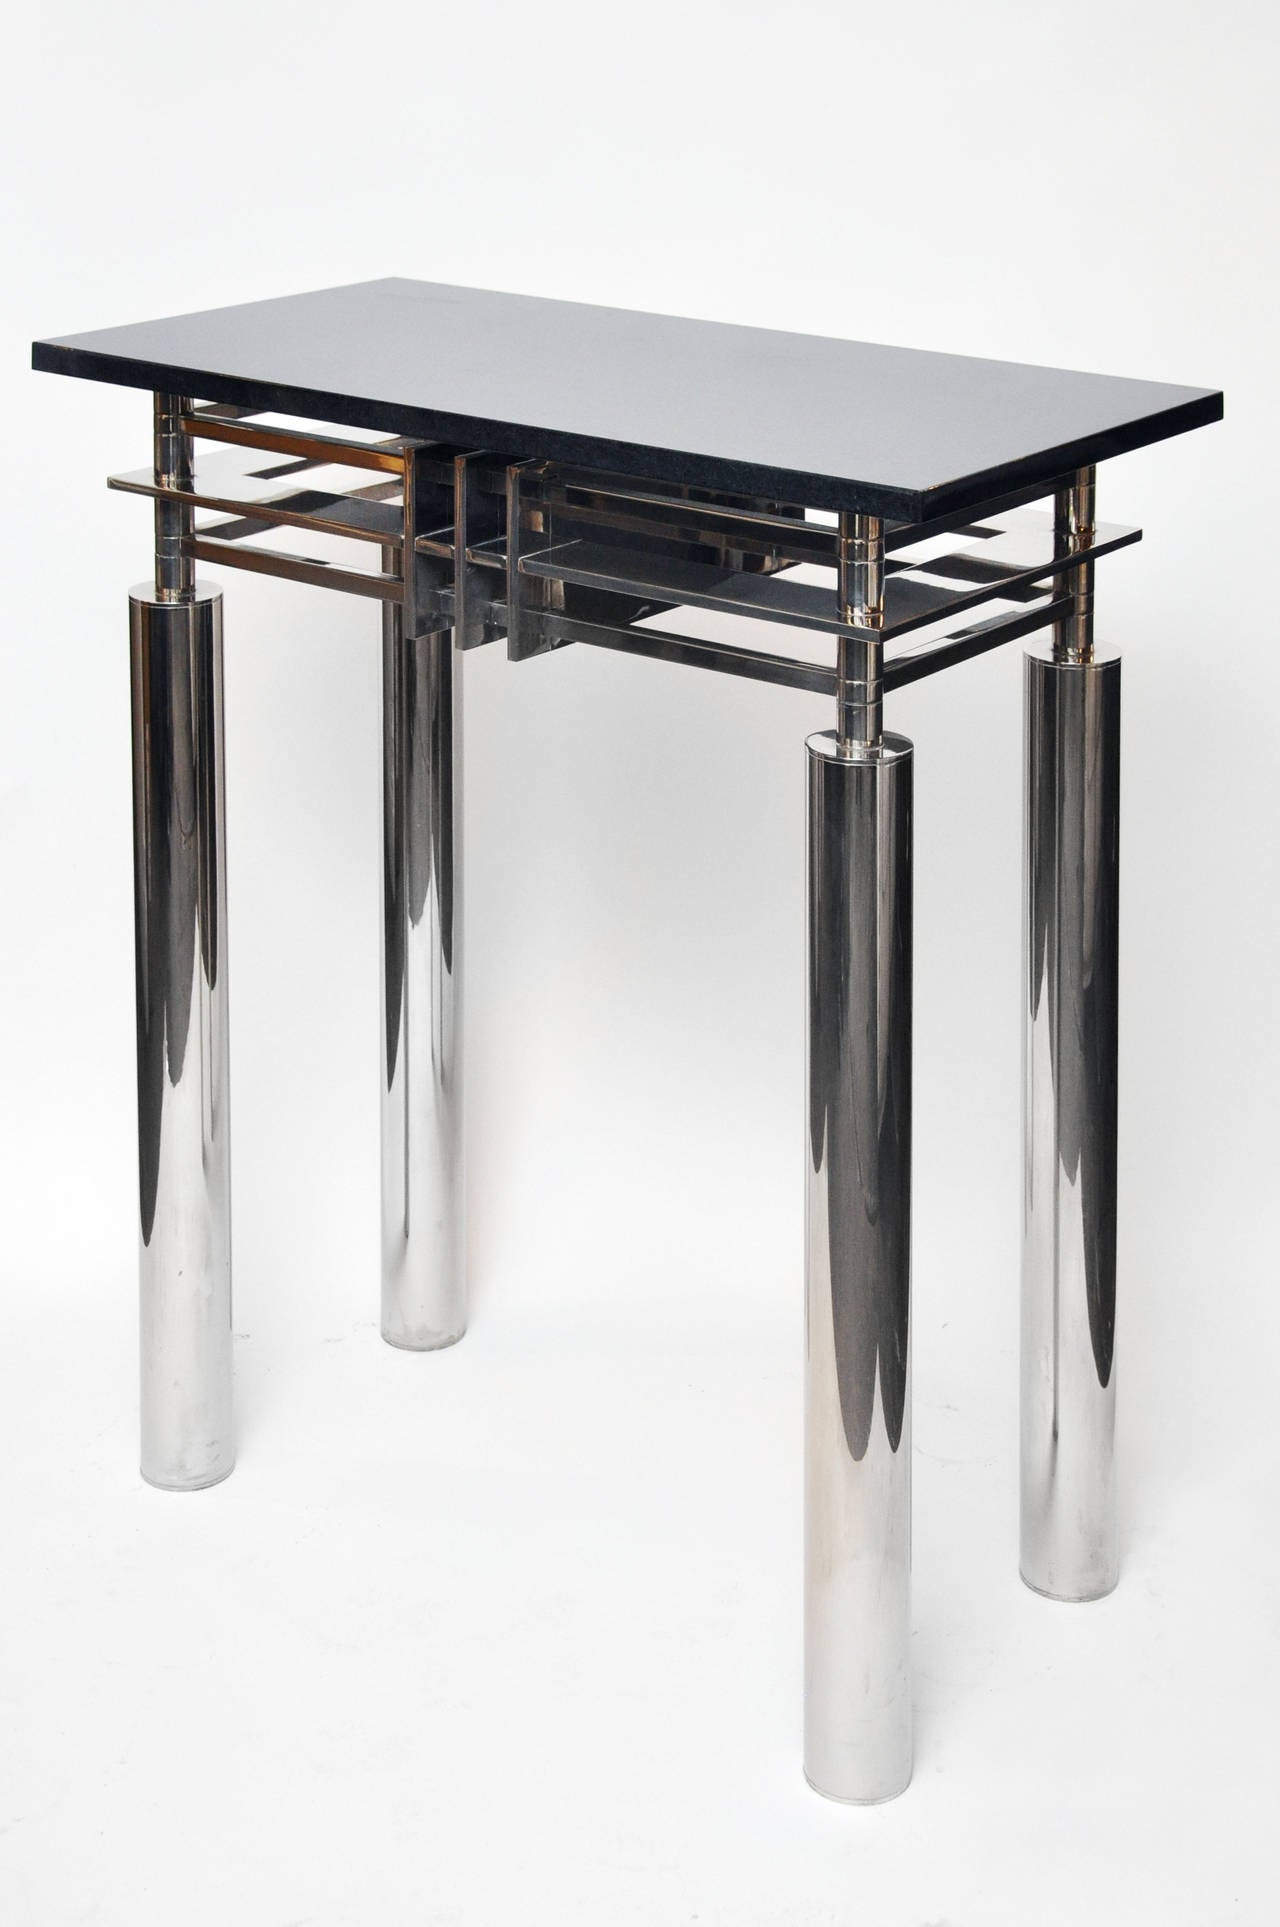 Beautiful high end chrome and marble tall console table. This is an extremely heavy piece. It has a sculptural quality. Marble top could be replaced with glass to show chrome lines and postmodern graphic design.